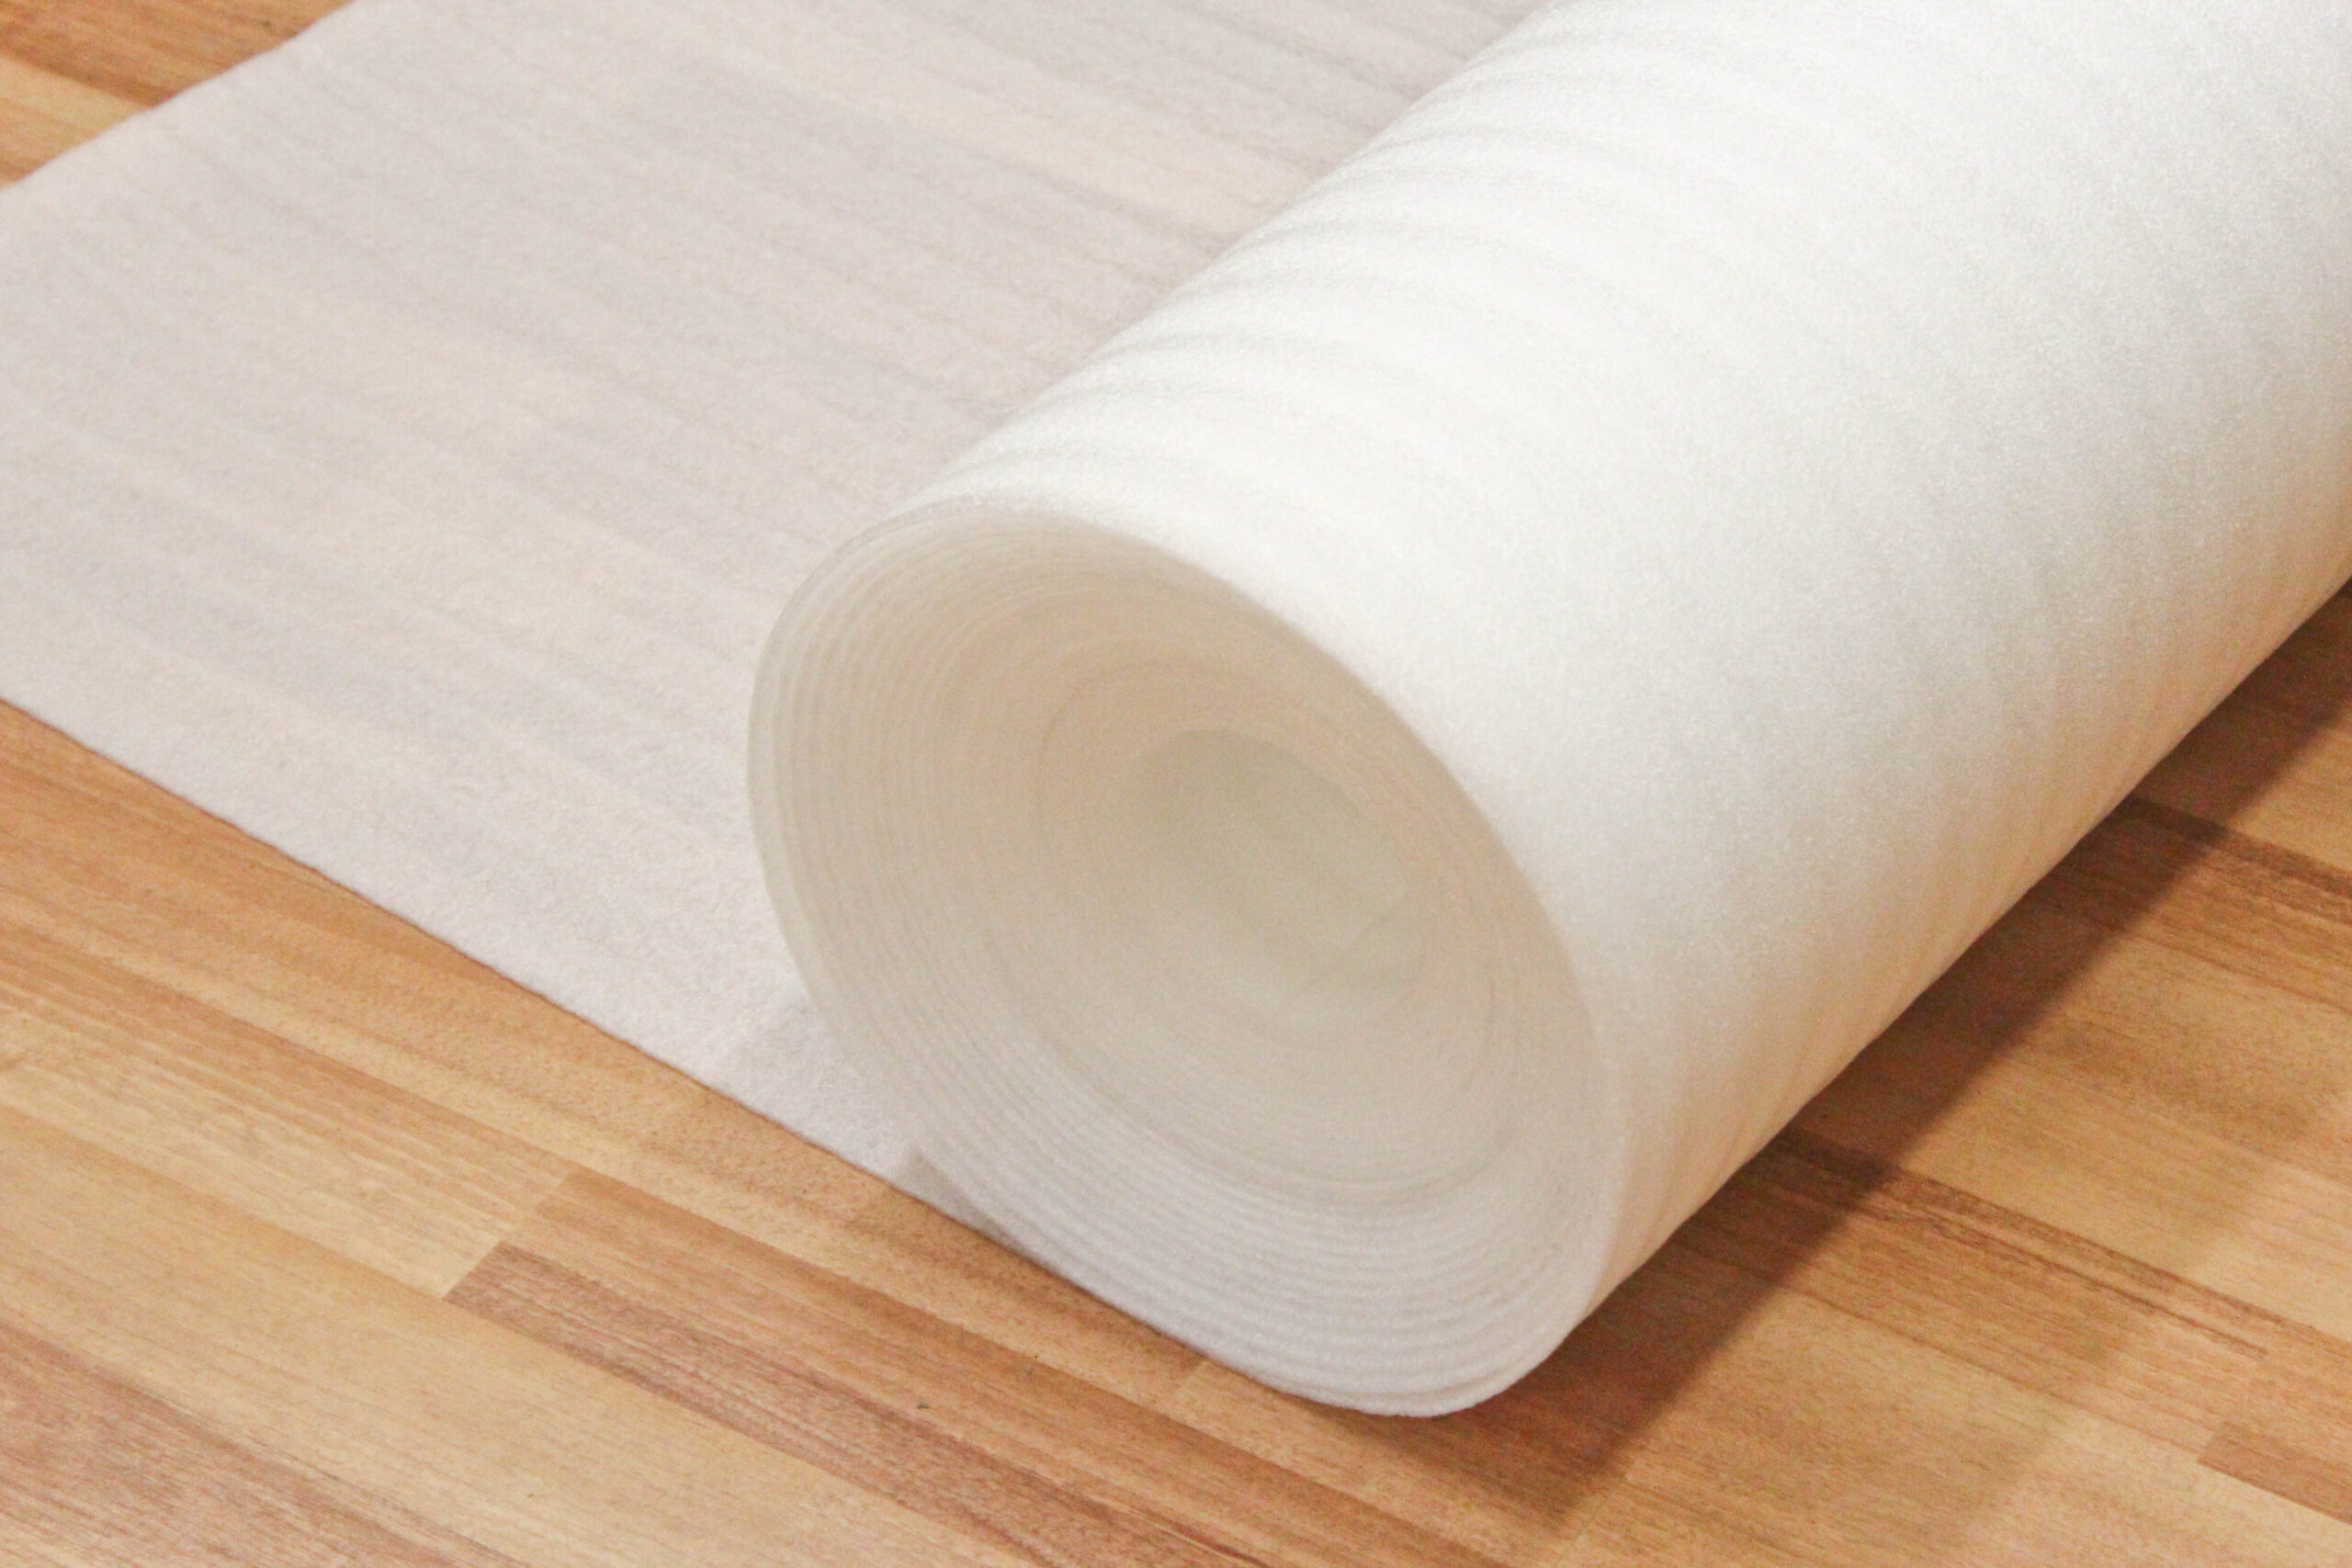 How to choose laminate floor underlay for
  your home?